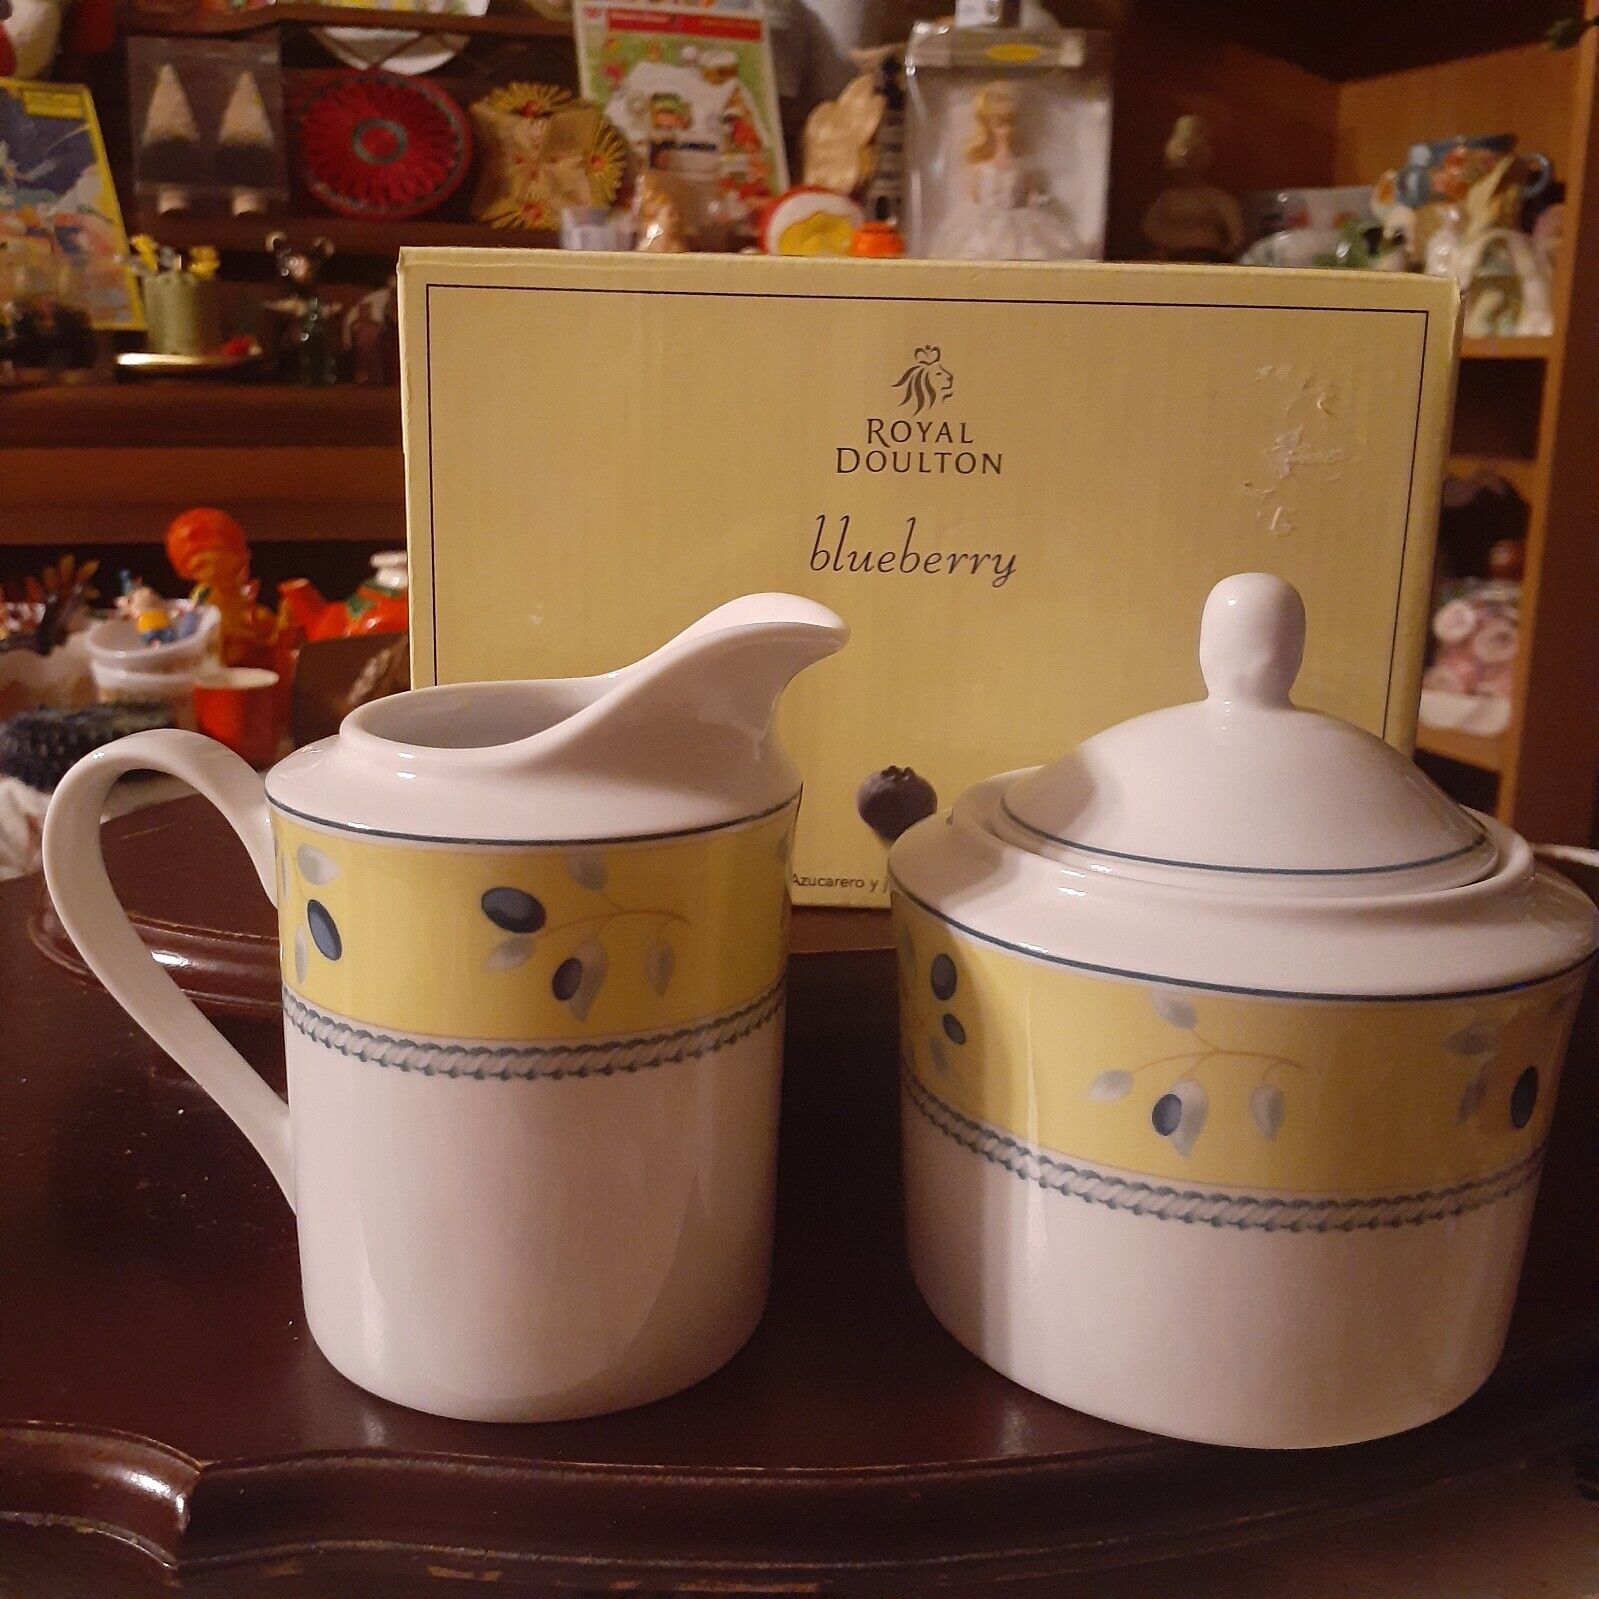 Royal Doulton Blueberry Cream and Sugar Bowl, 2005. New in box